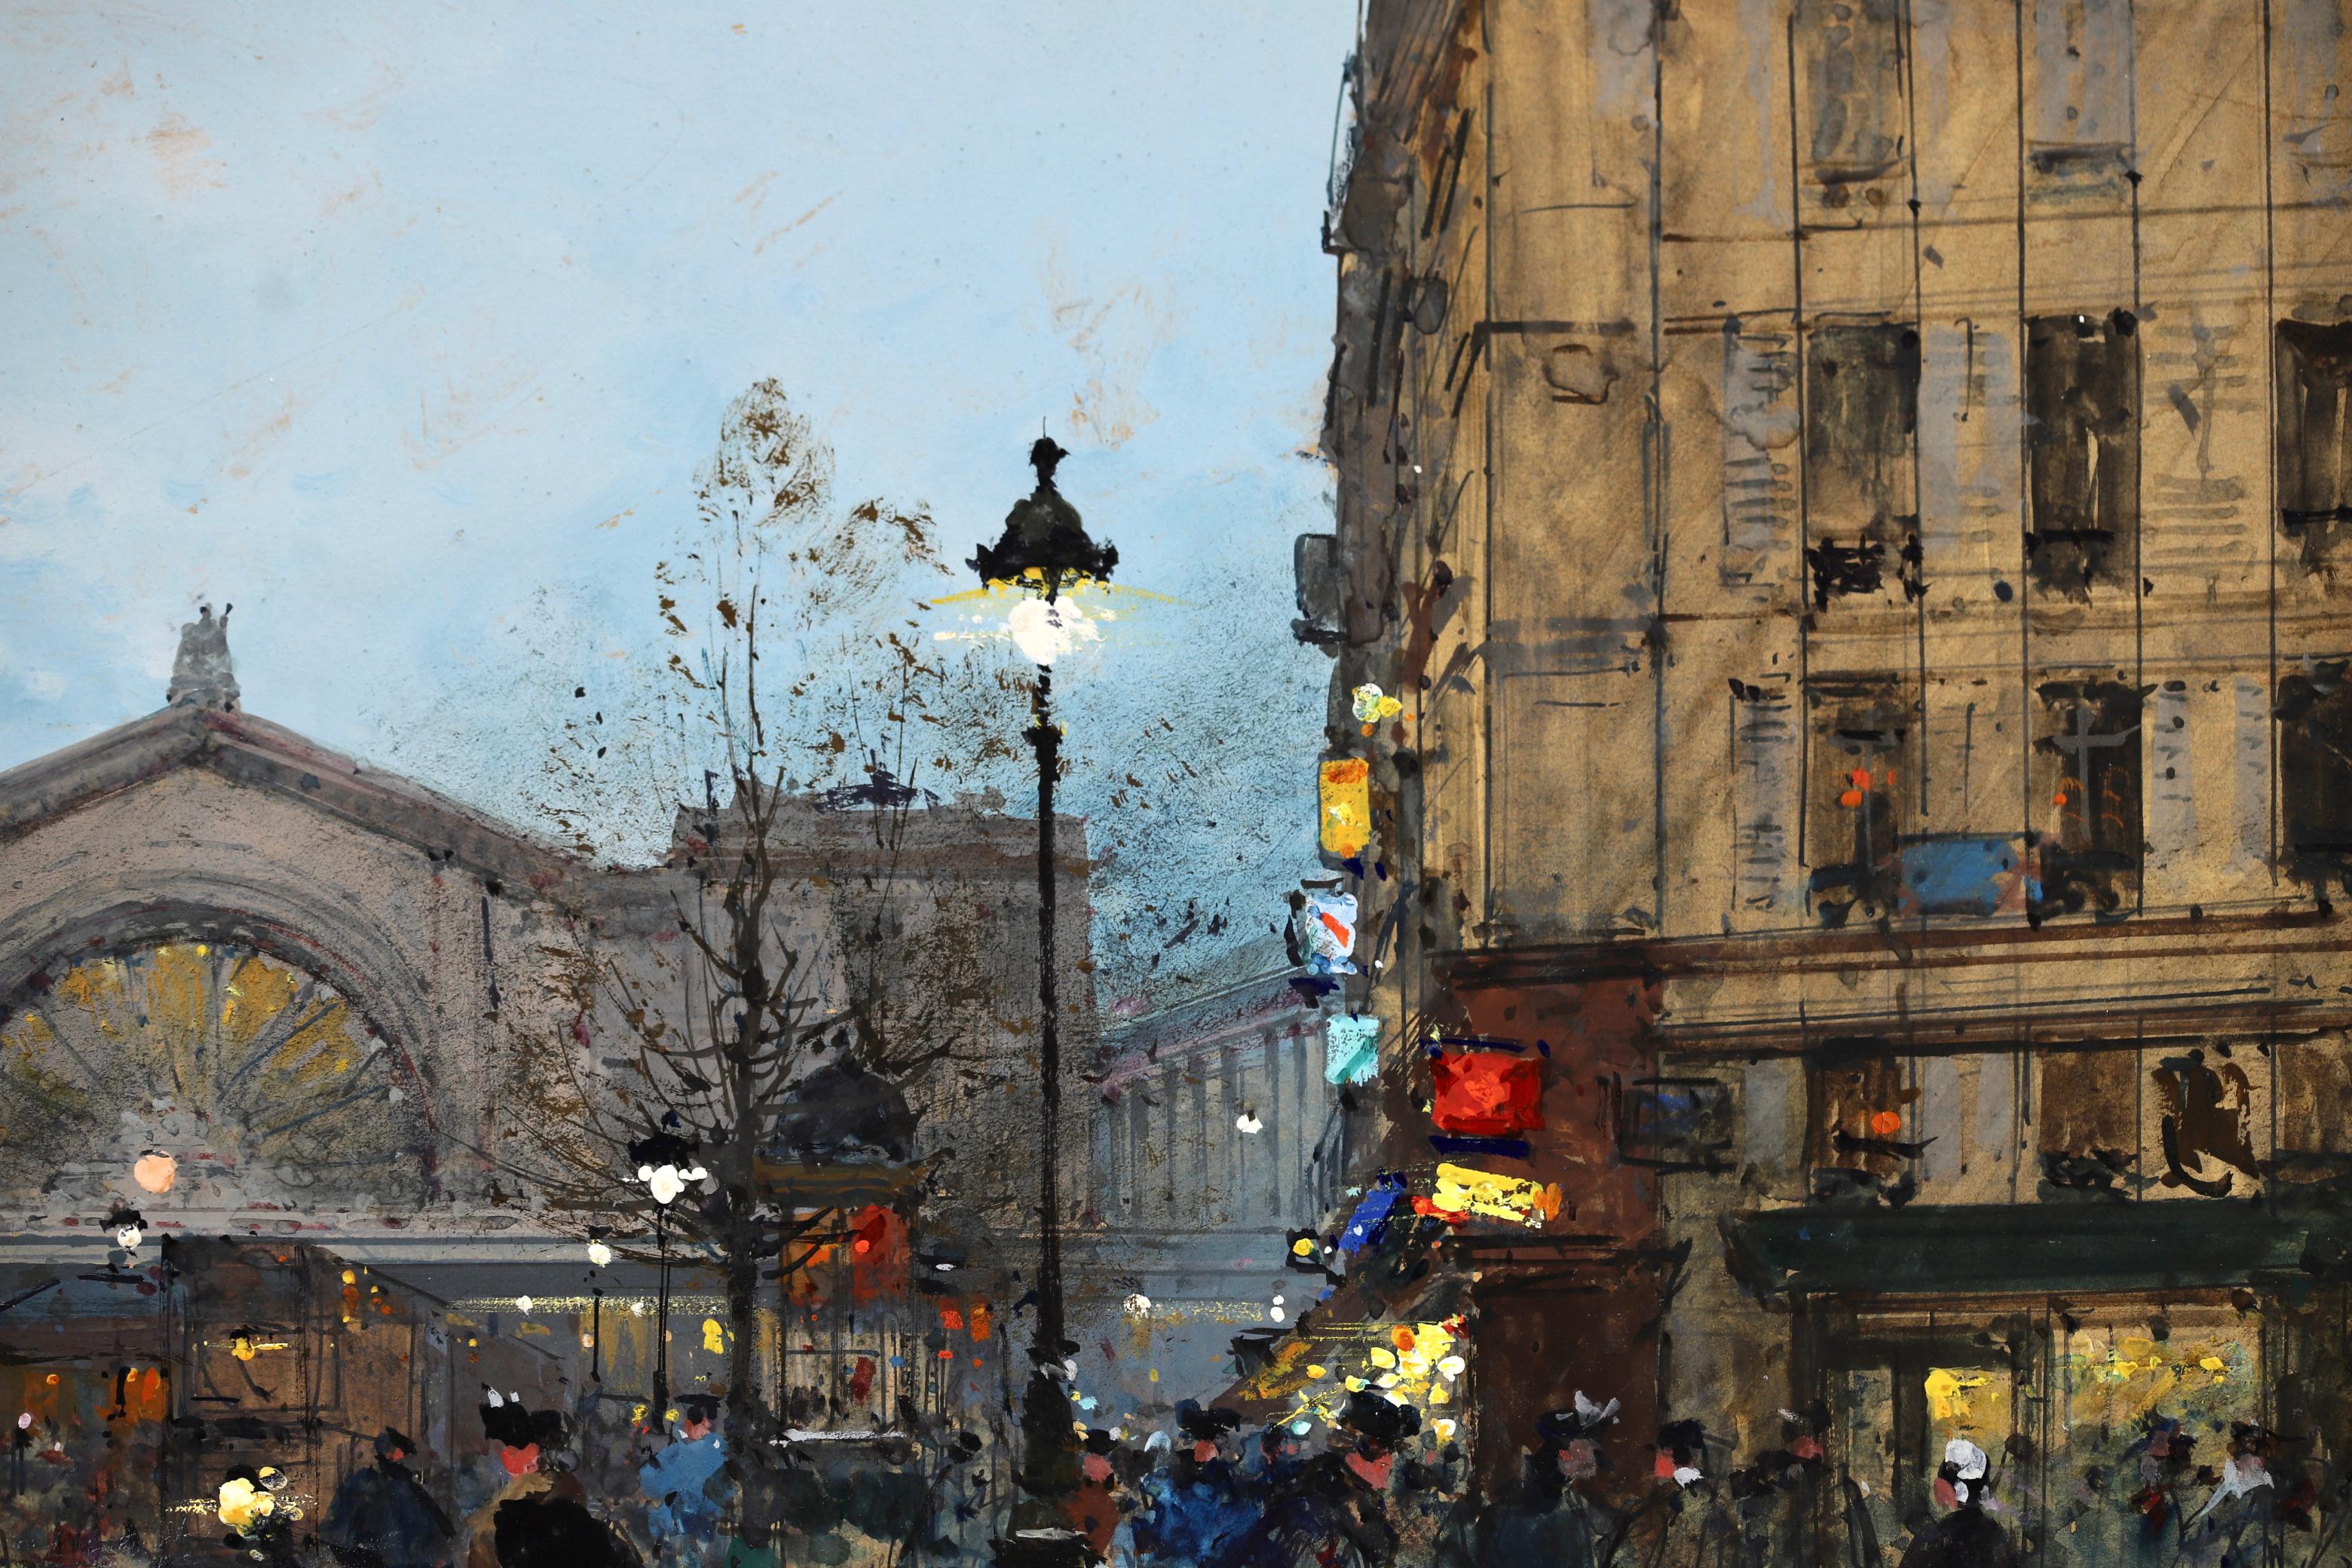 Beautiful gouache on board figures in landscape circa 1900 by French impressionist painter Eugene Galien-Laloue.  The piece depicts a bustling scene outside la gare de l'est (East Station), Paris on a cold winter's day. 

Signature:
Signed lower